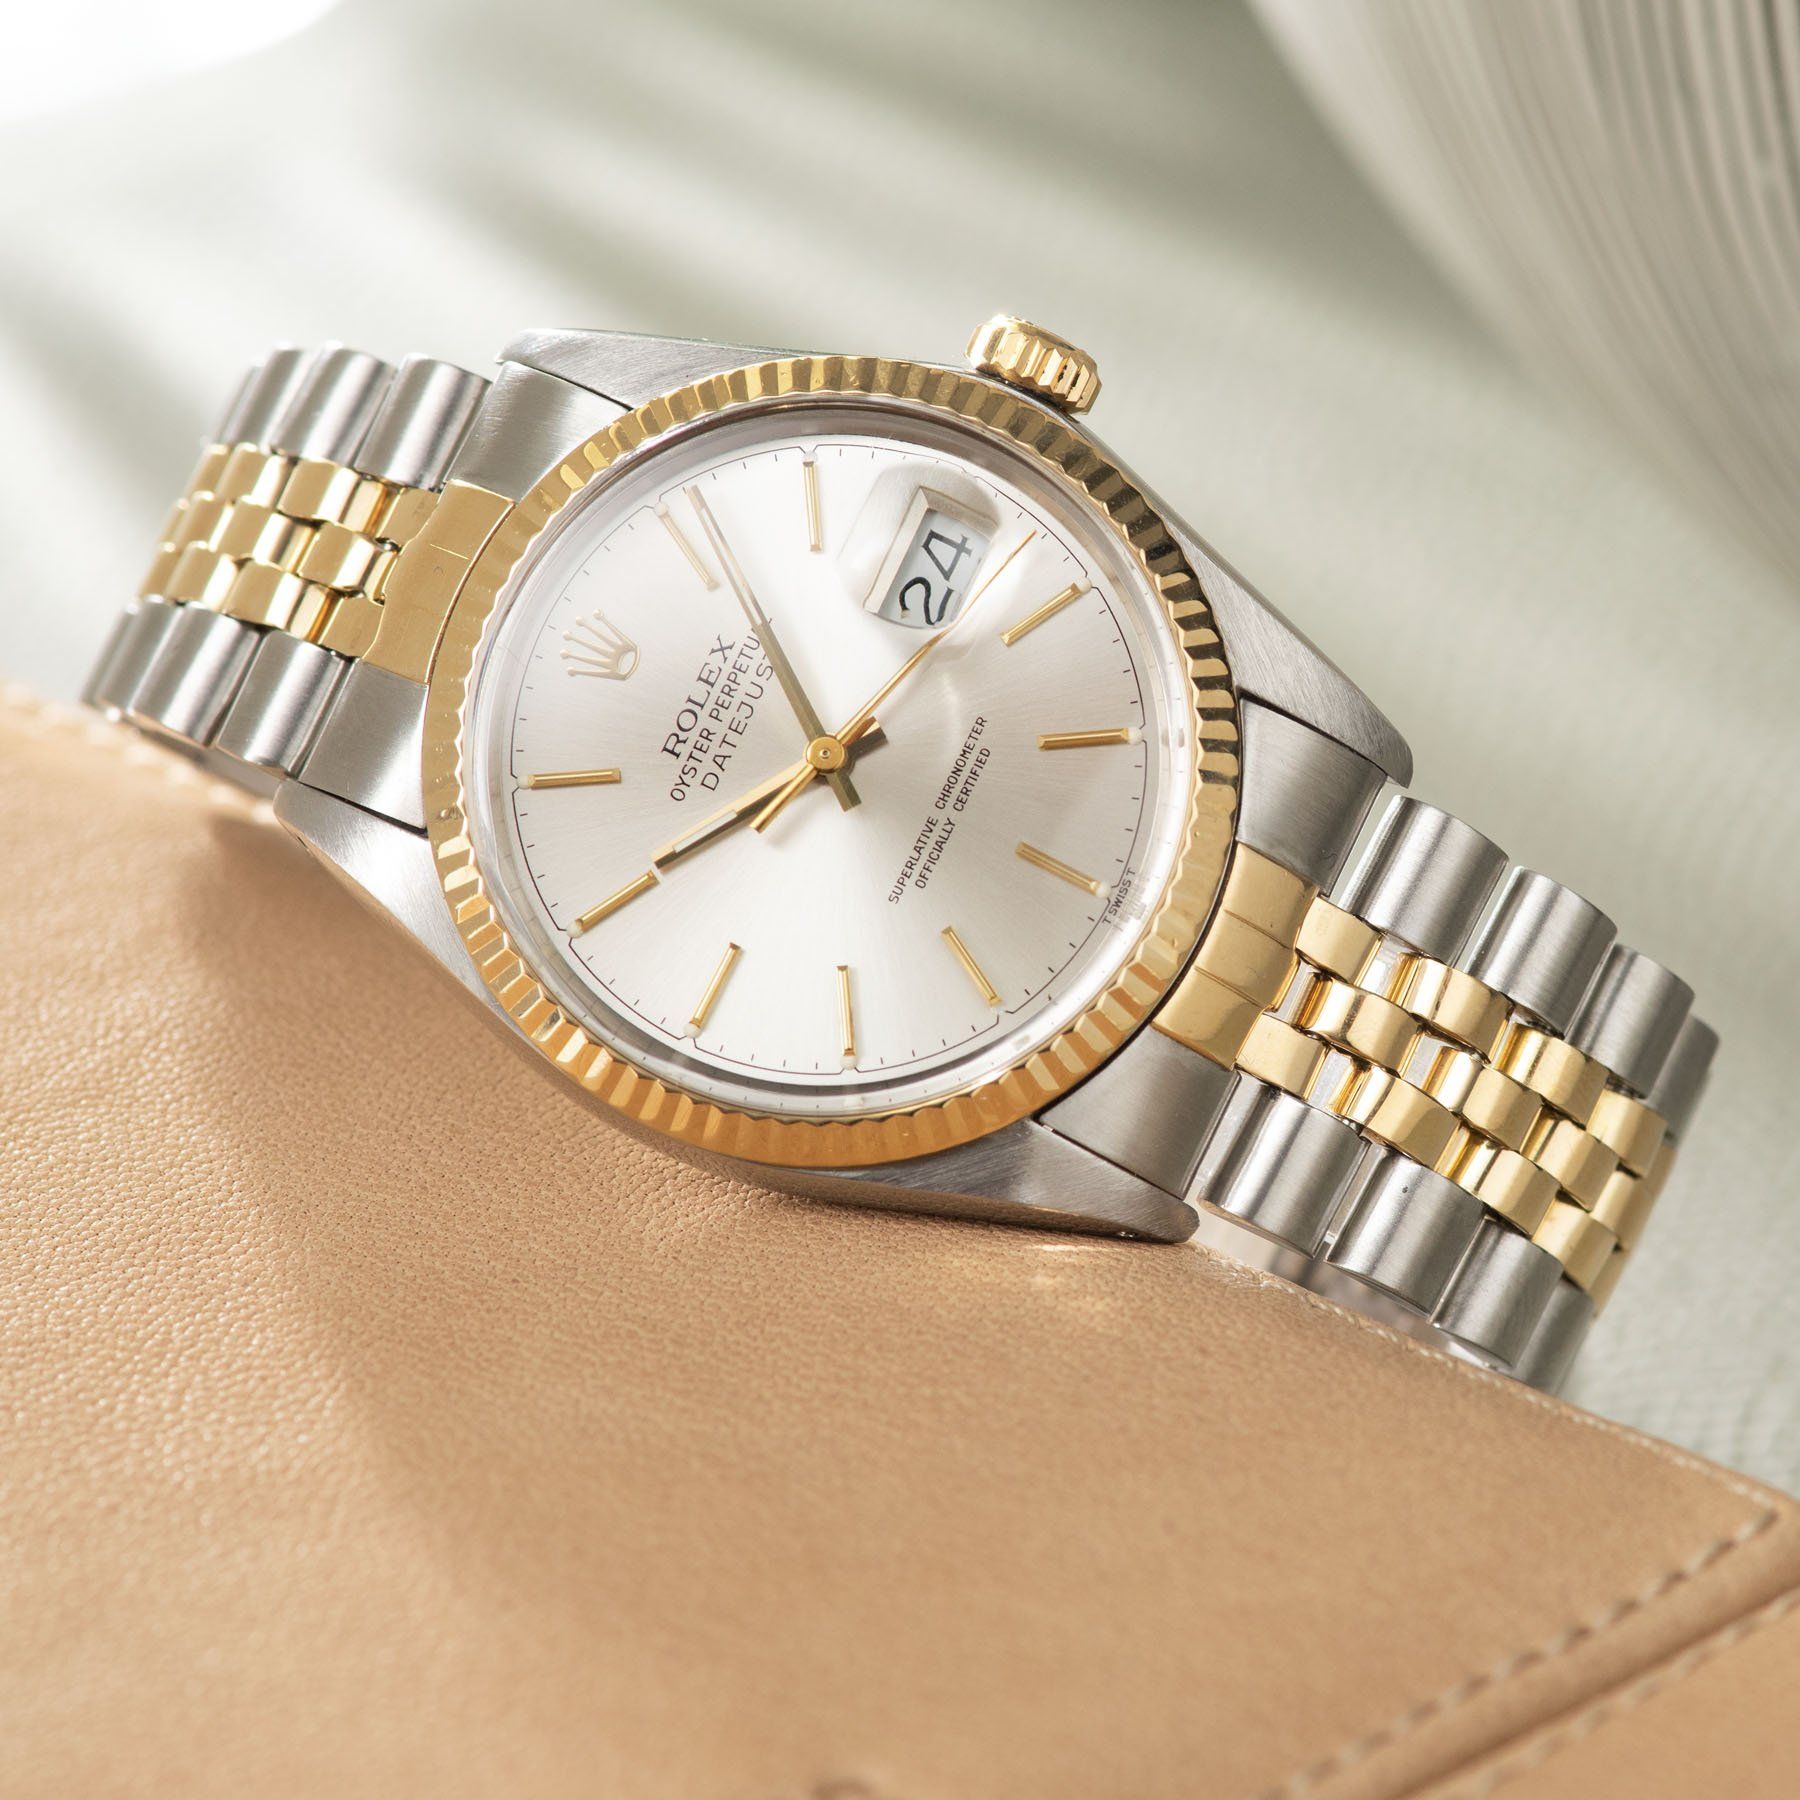 Rolex Datejust Steel and Gold 16013 Silver Dial